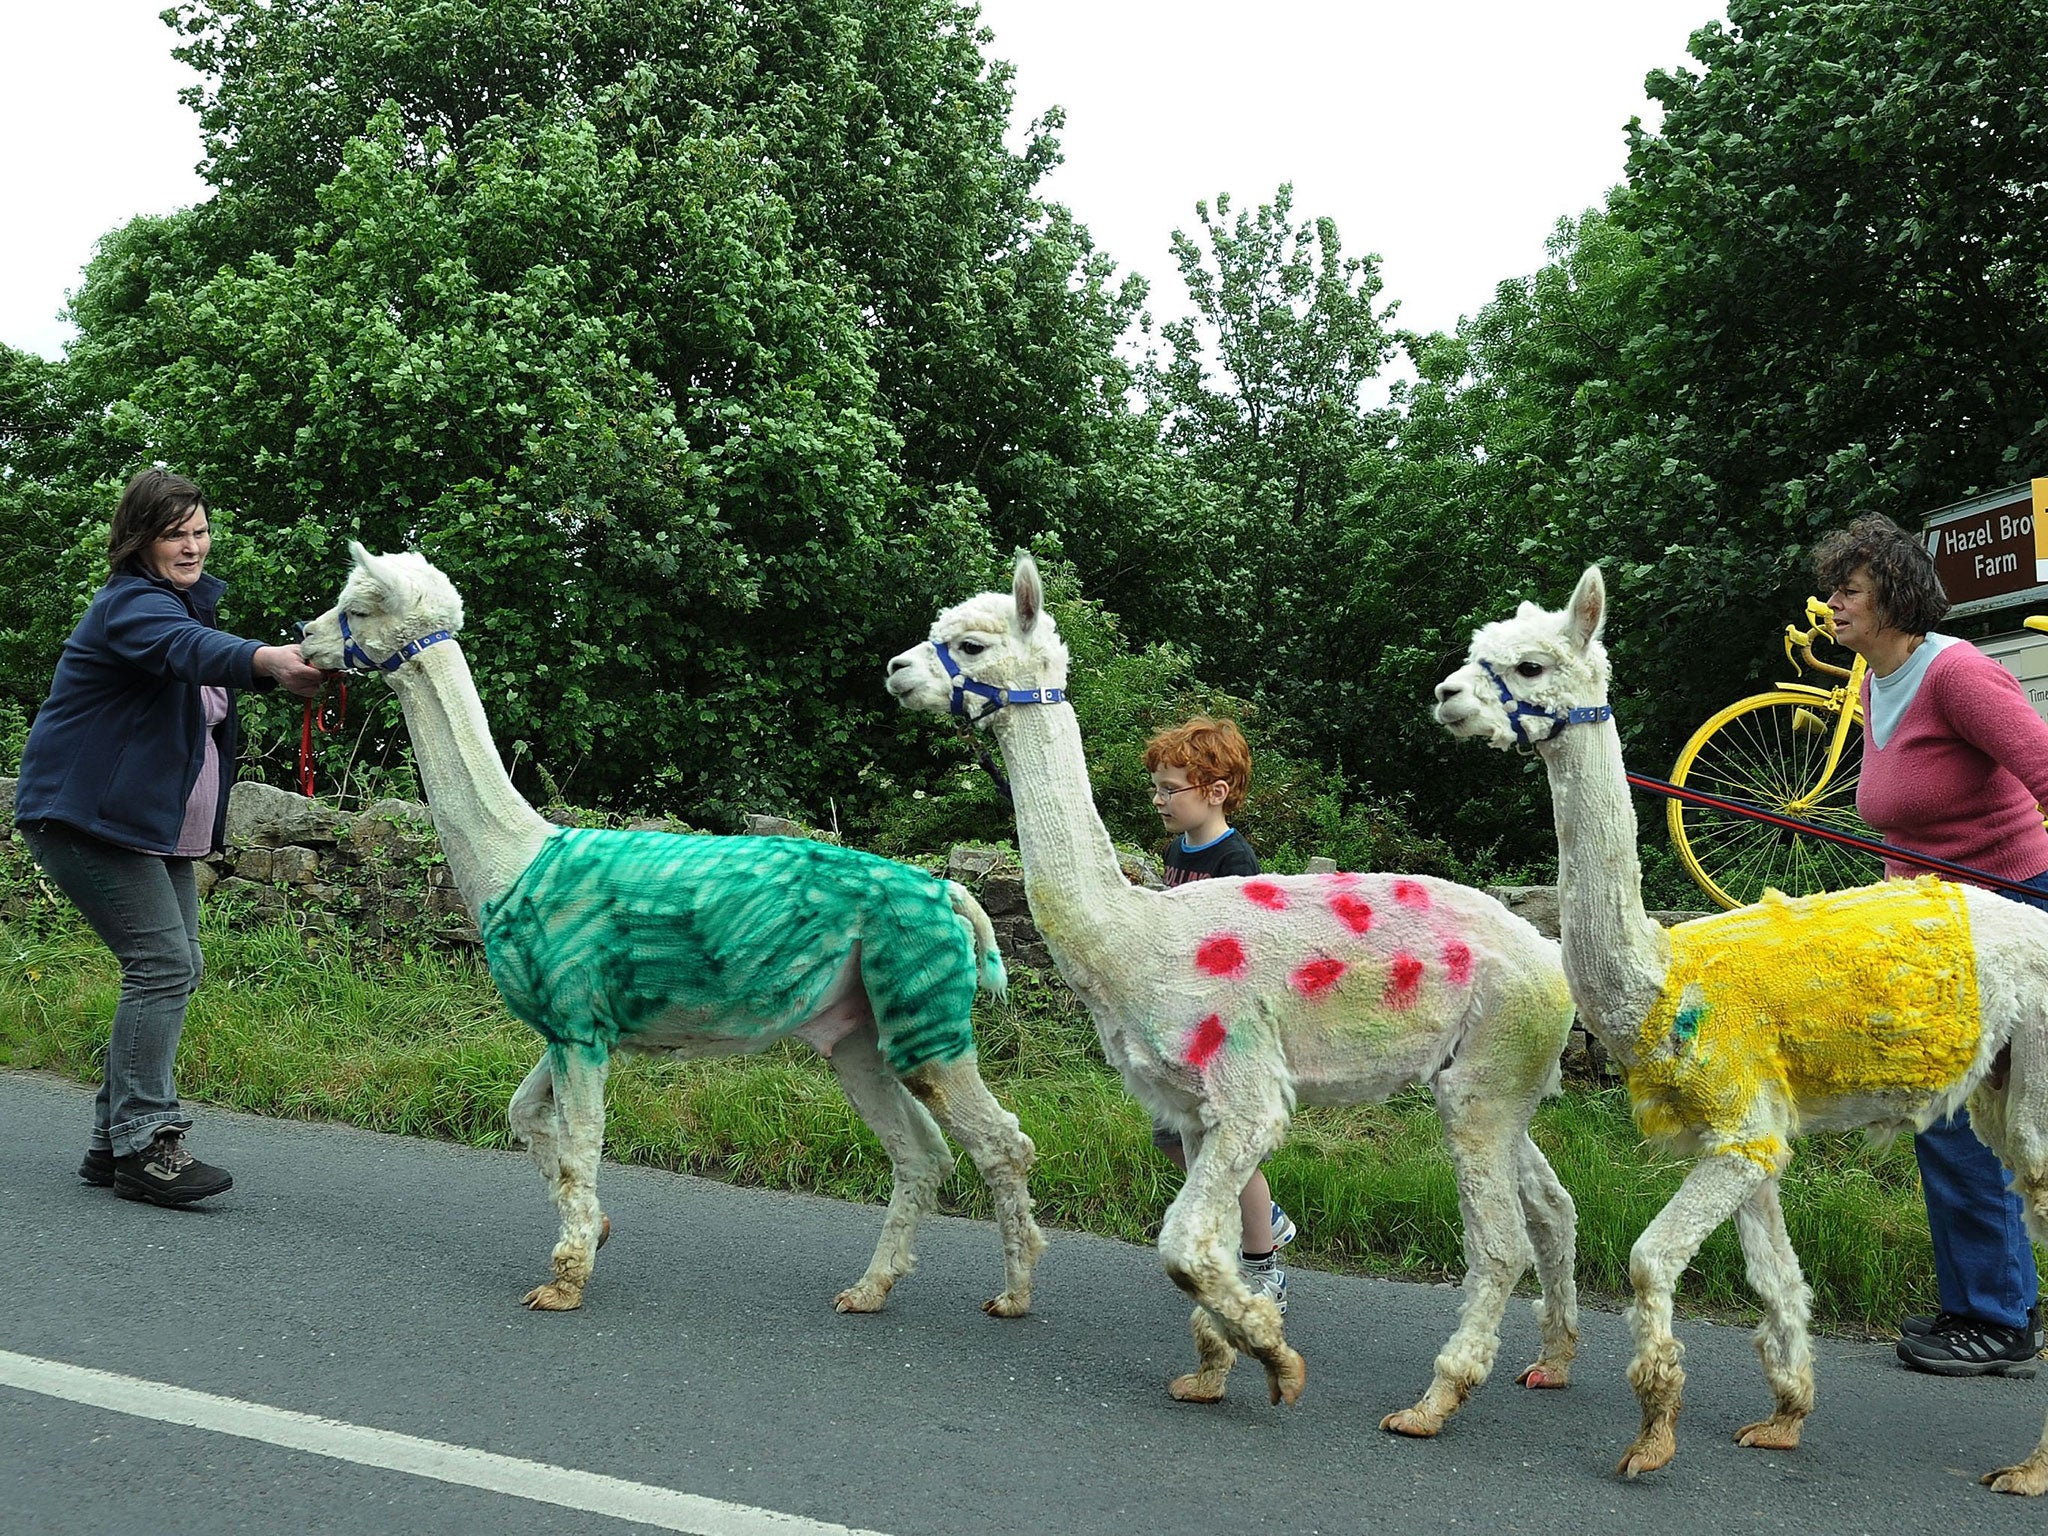 Alpacas with their wool dyed in Tour jersey colours walk
part of the route near Reeth in Yorkshire